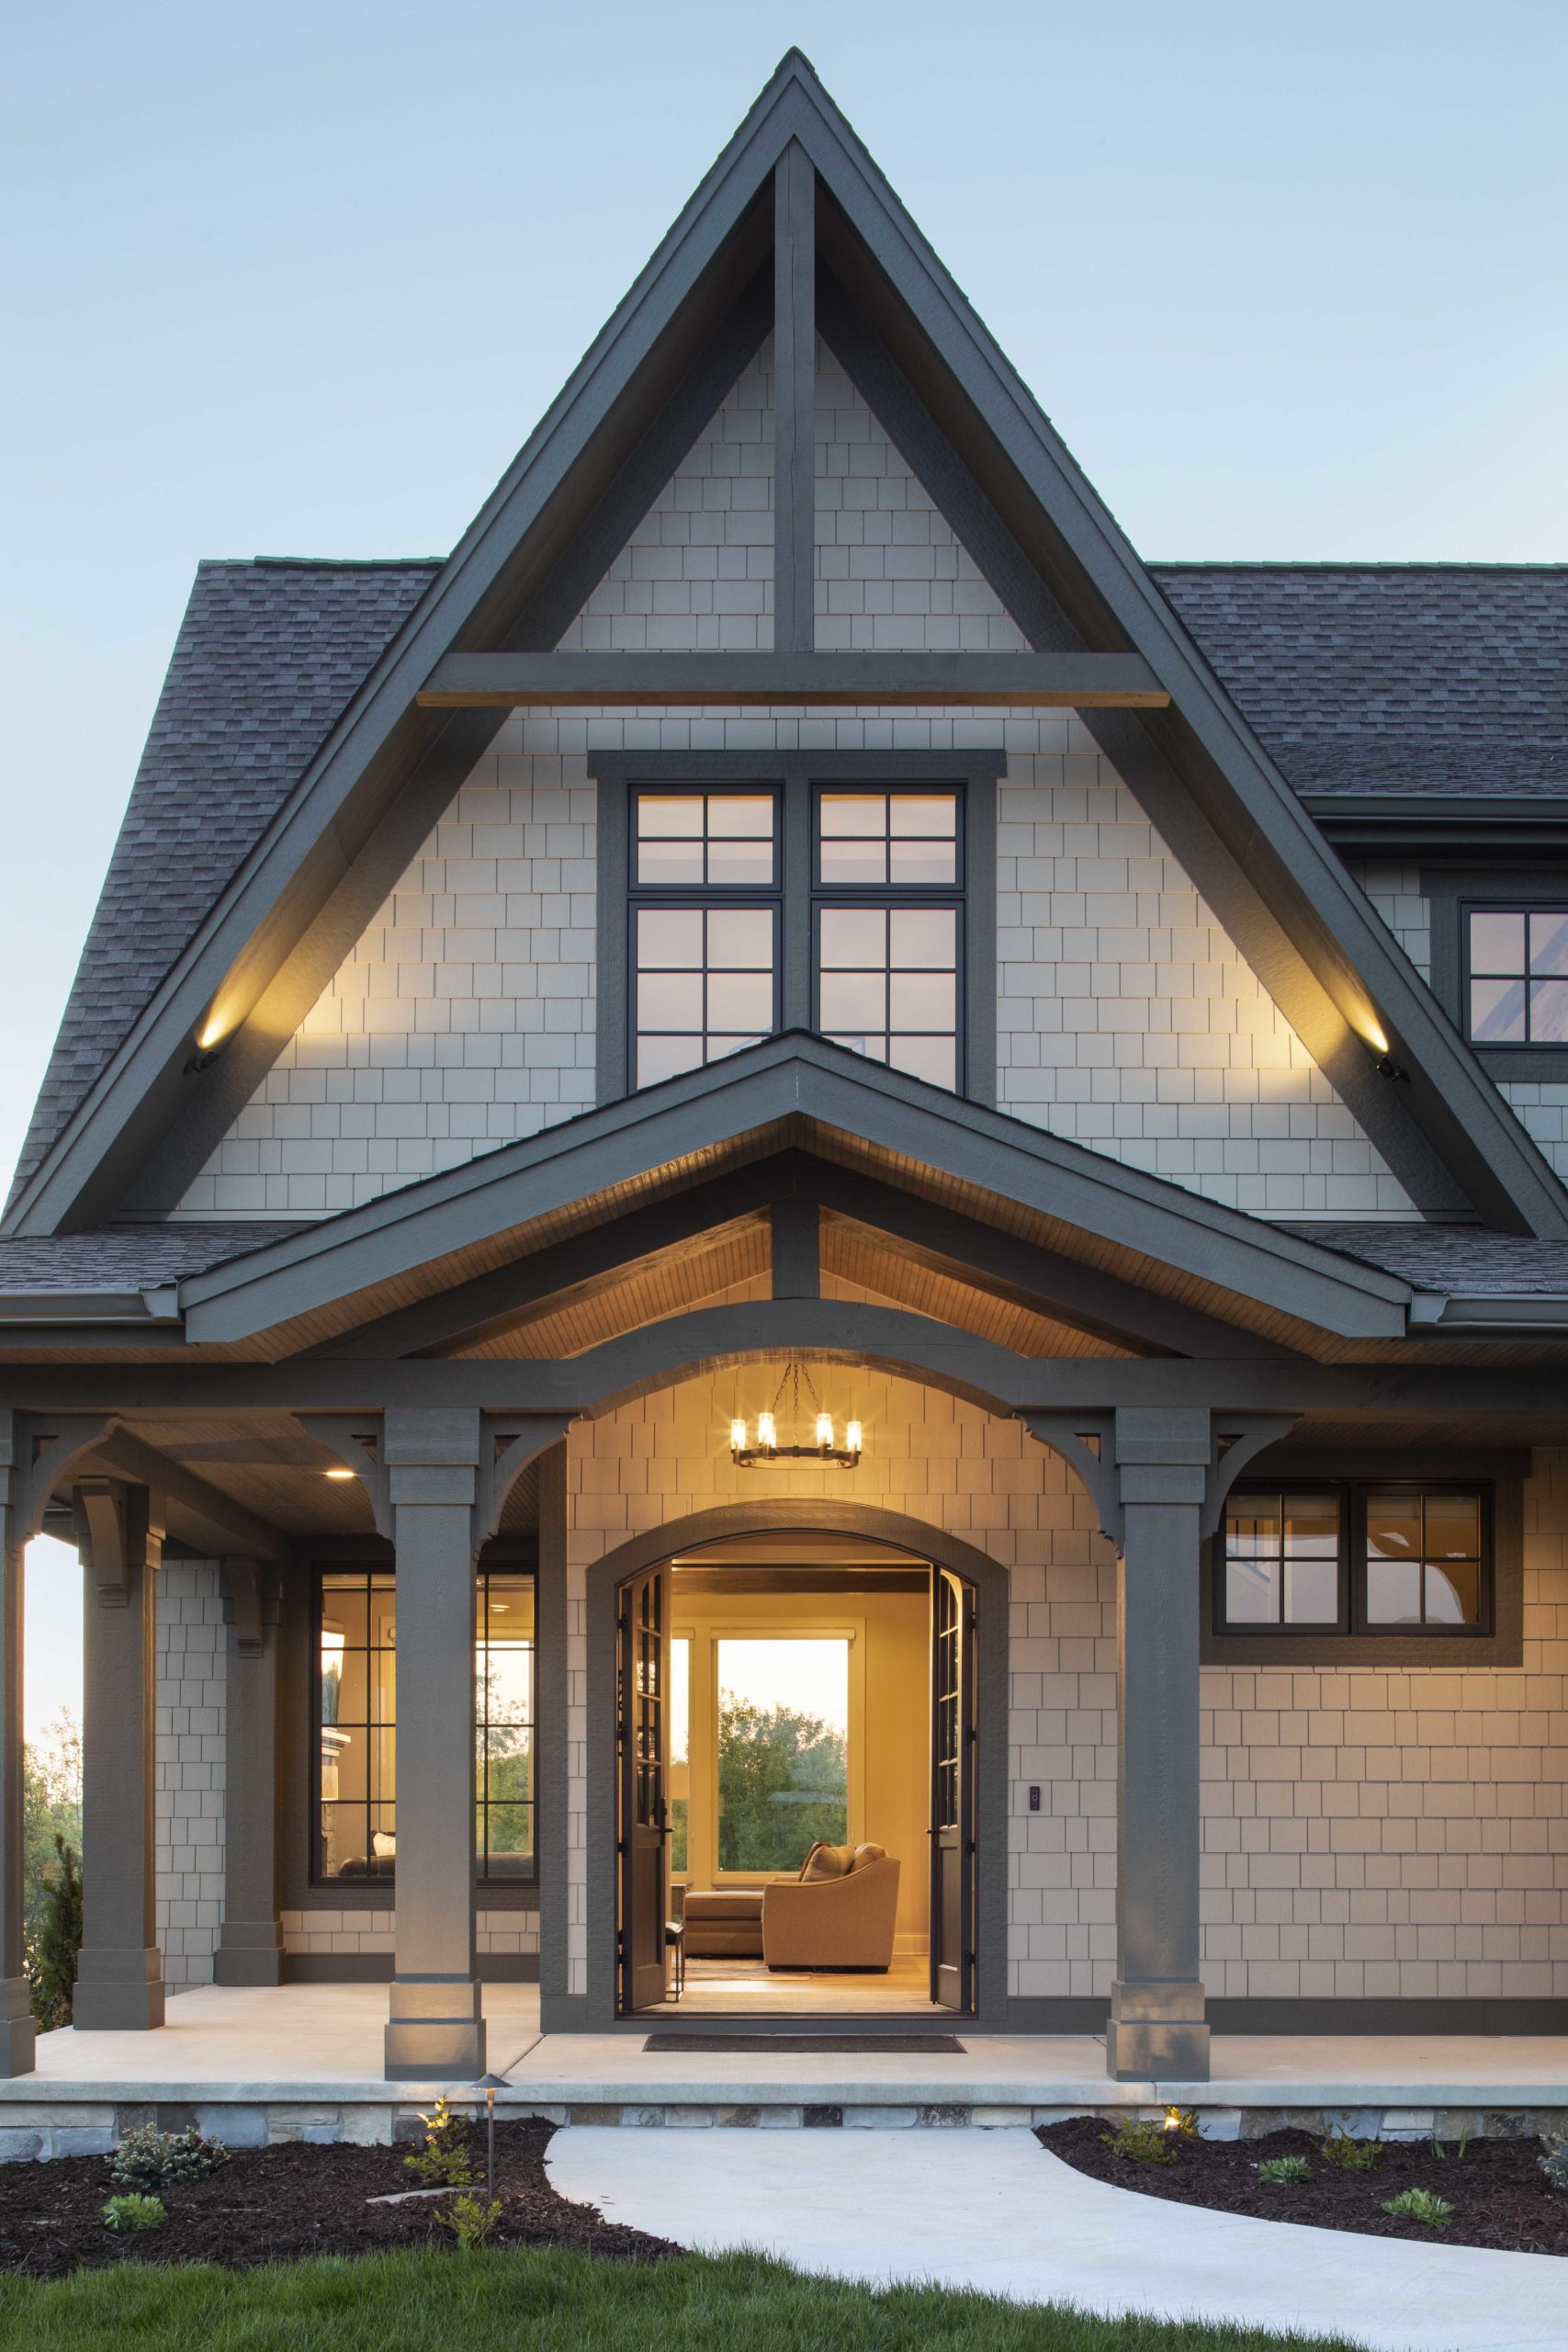 A home with a large front porch and a large front door.